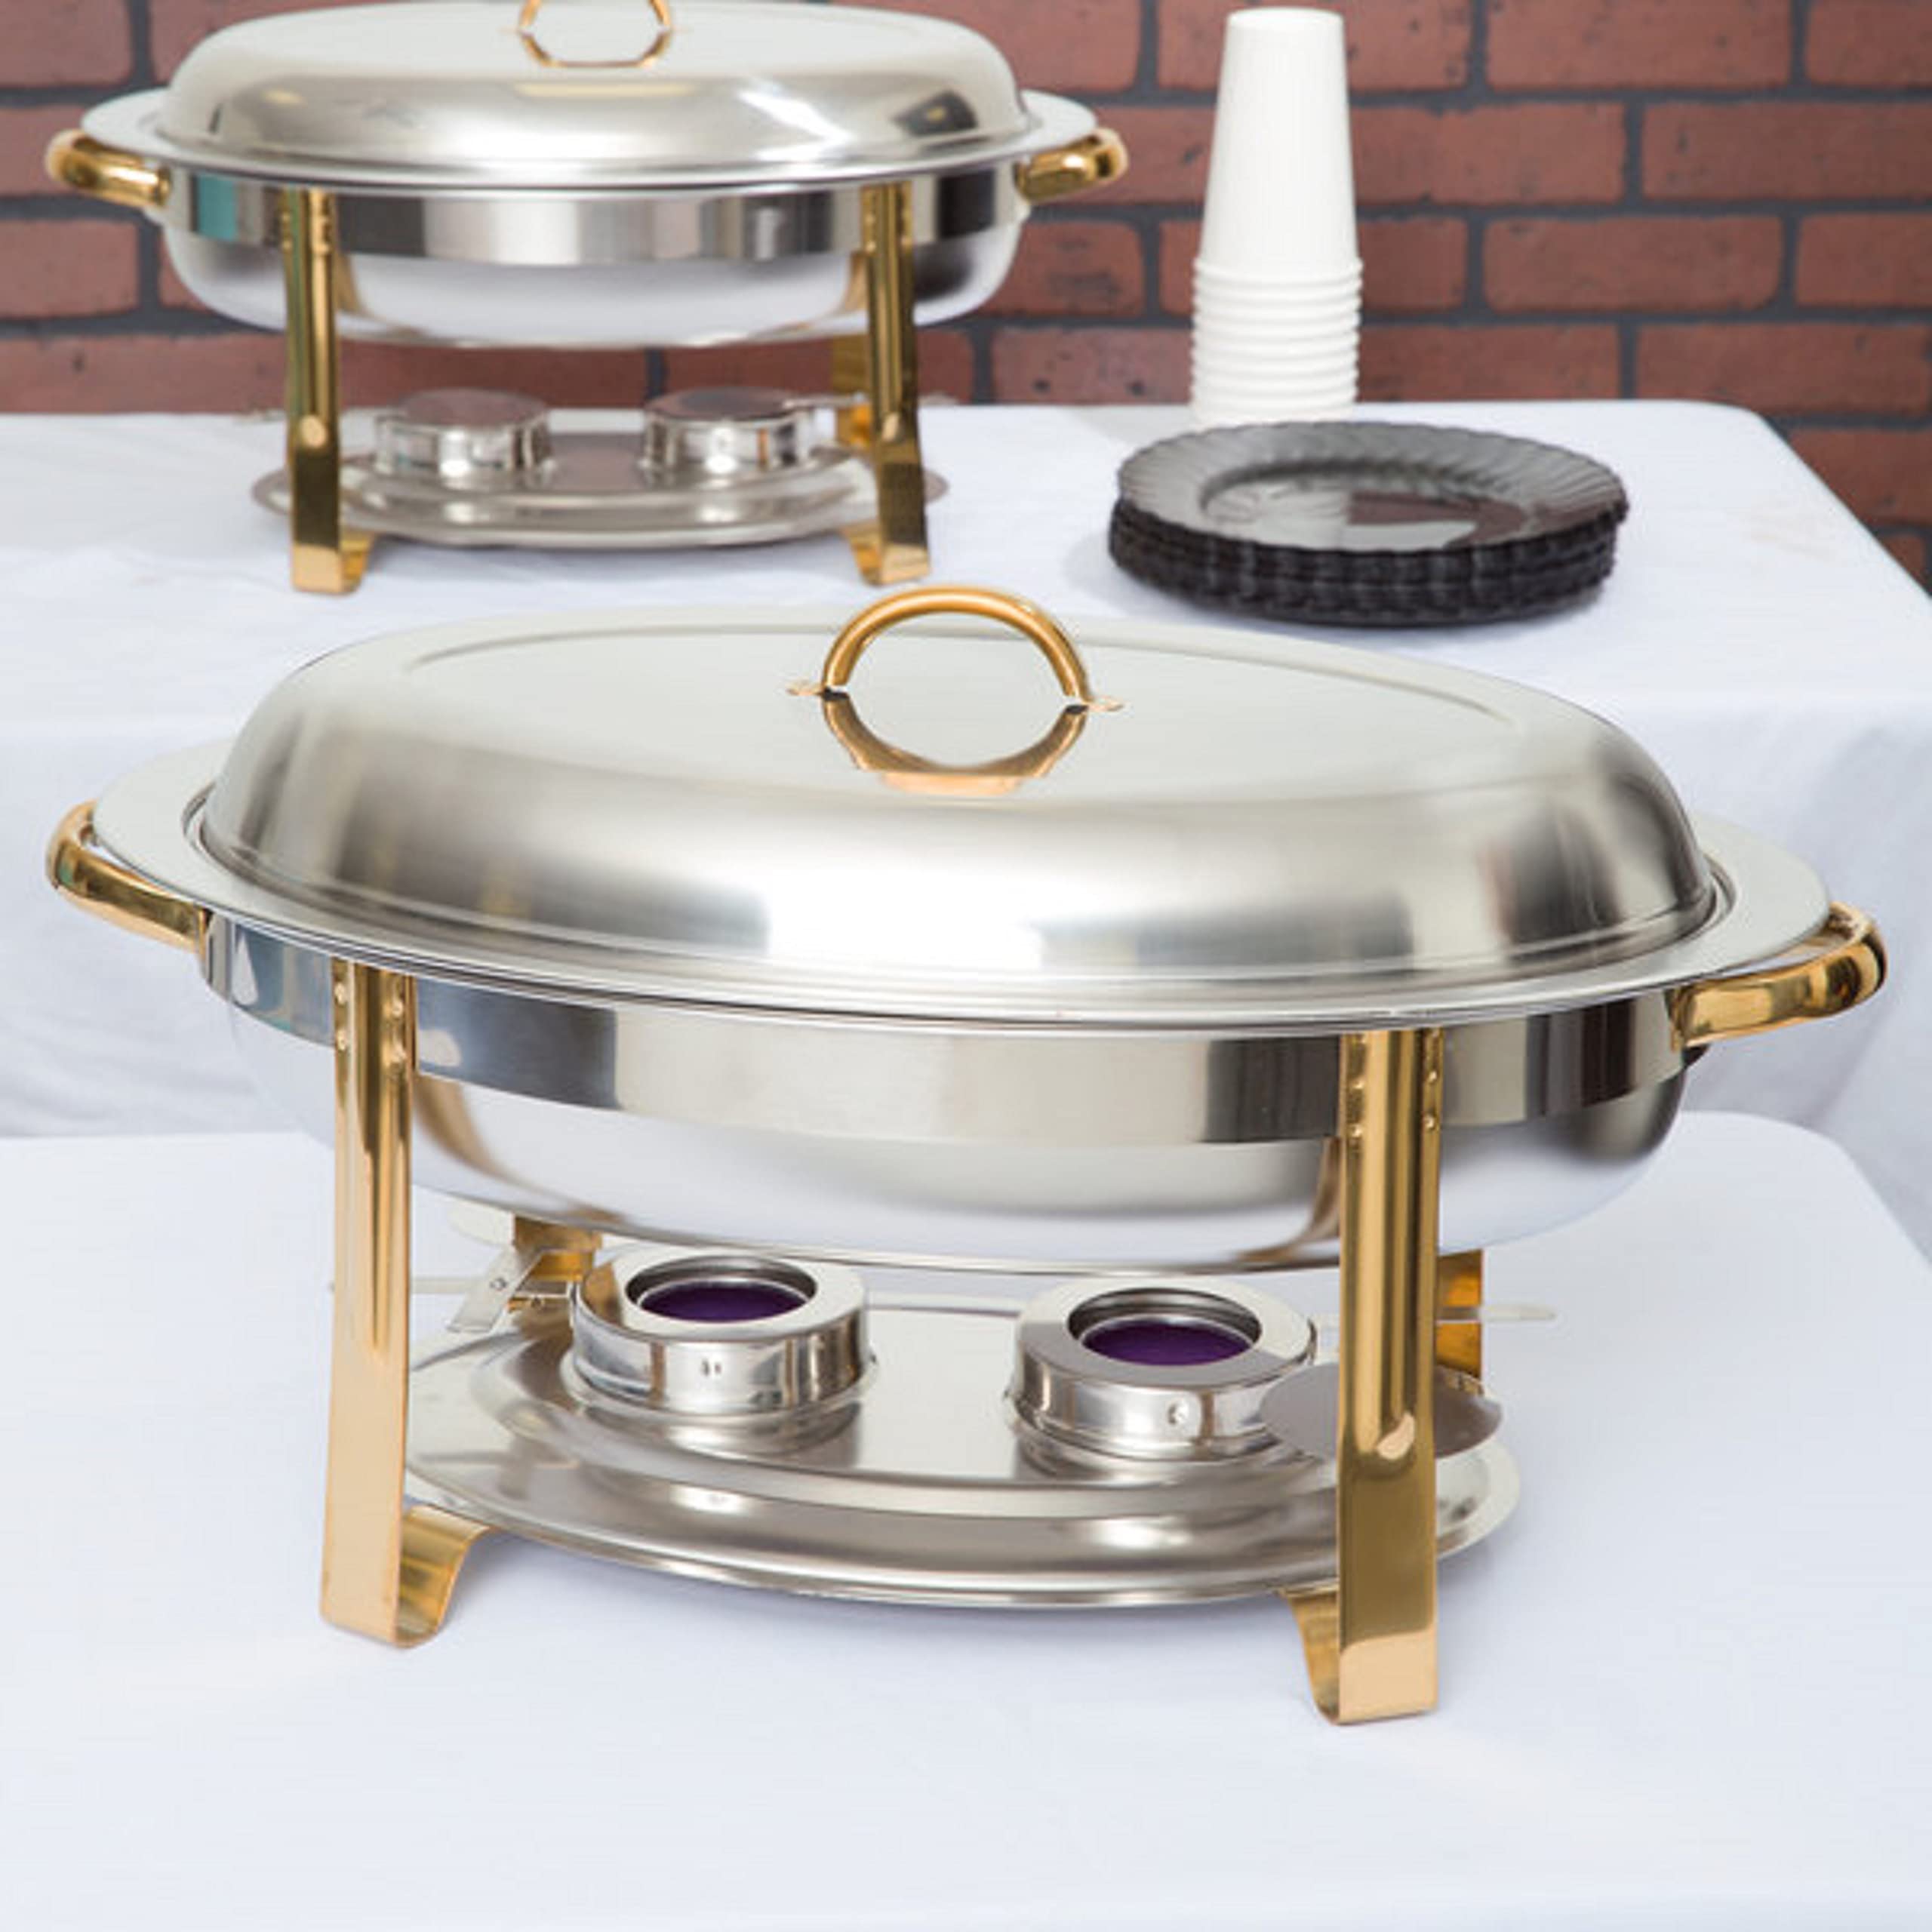 TrueCraftware 6 Qt. Half Size Stainless Steel Gold Accented Oval Chafing Dish Complete Set- Chafers and Buffet Warmer Sets for Catering Event Party Holiday Buffet Weddings Catering